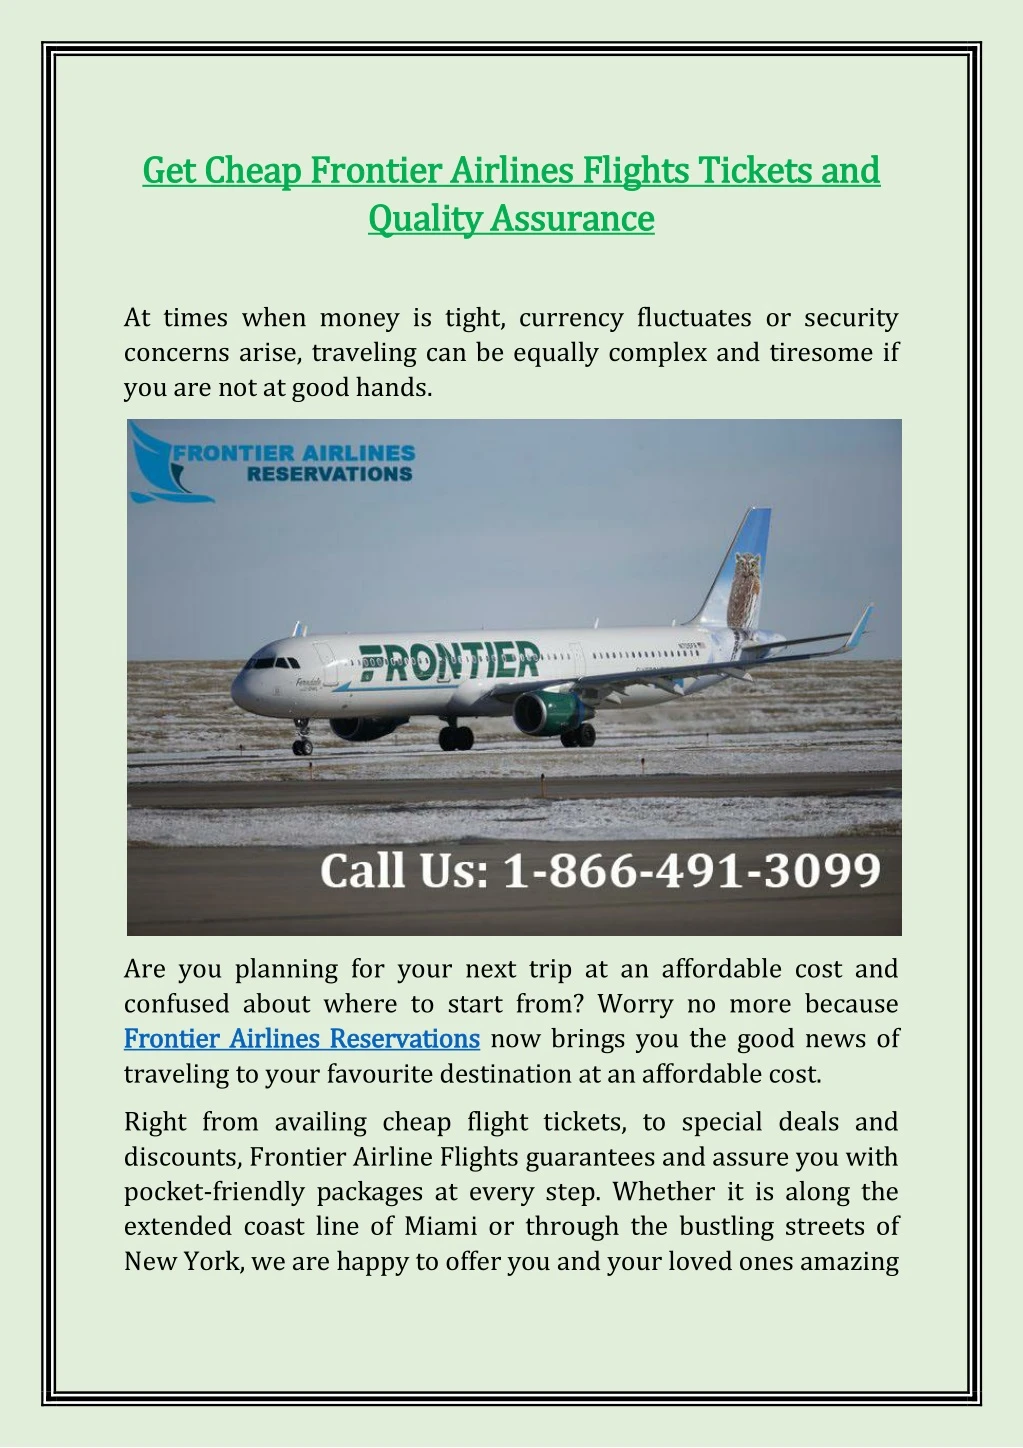 PPT - Get Cheap Frontier Airlines Flights Tickets and Quality Assurance ...